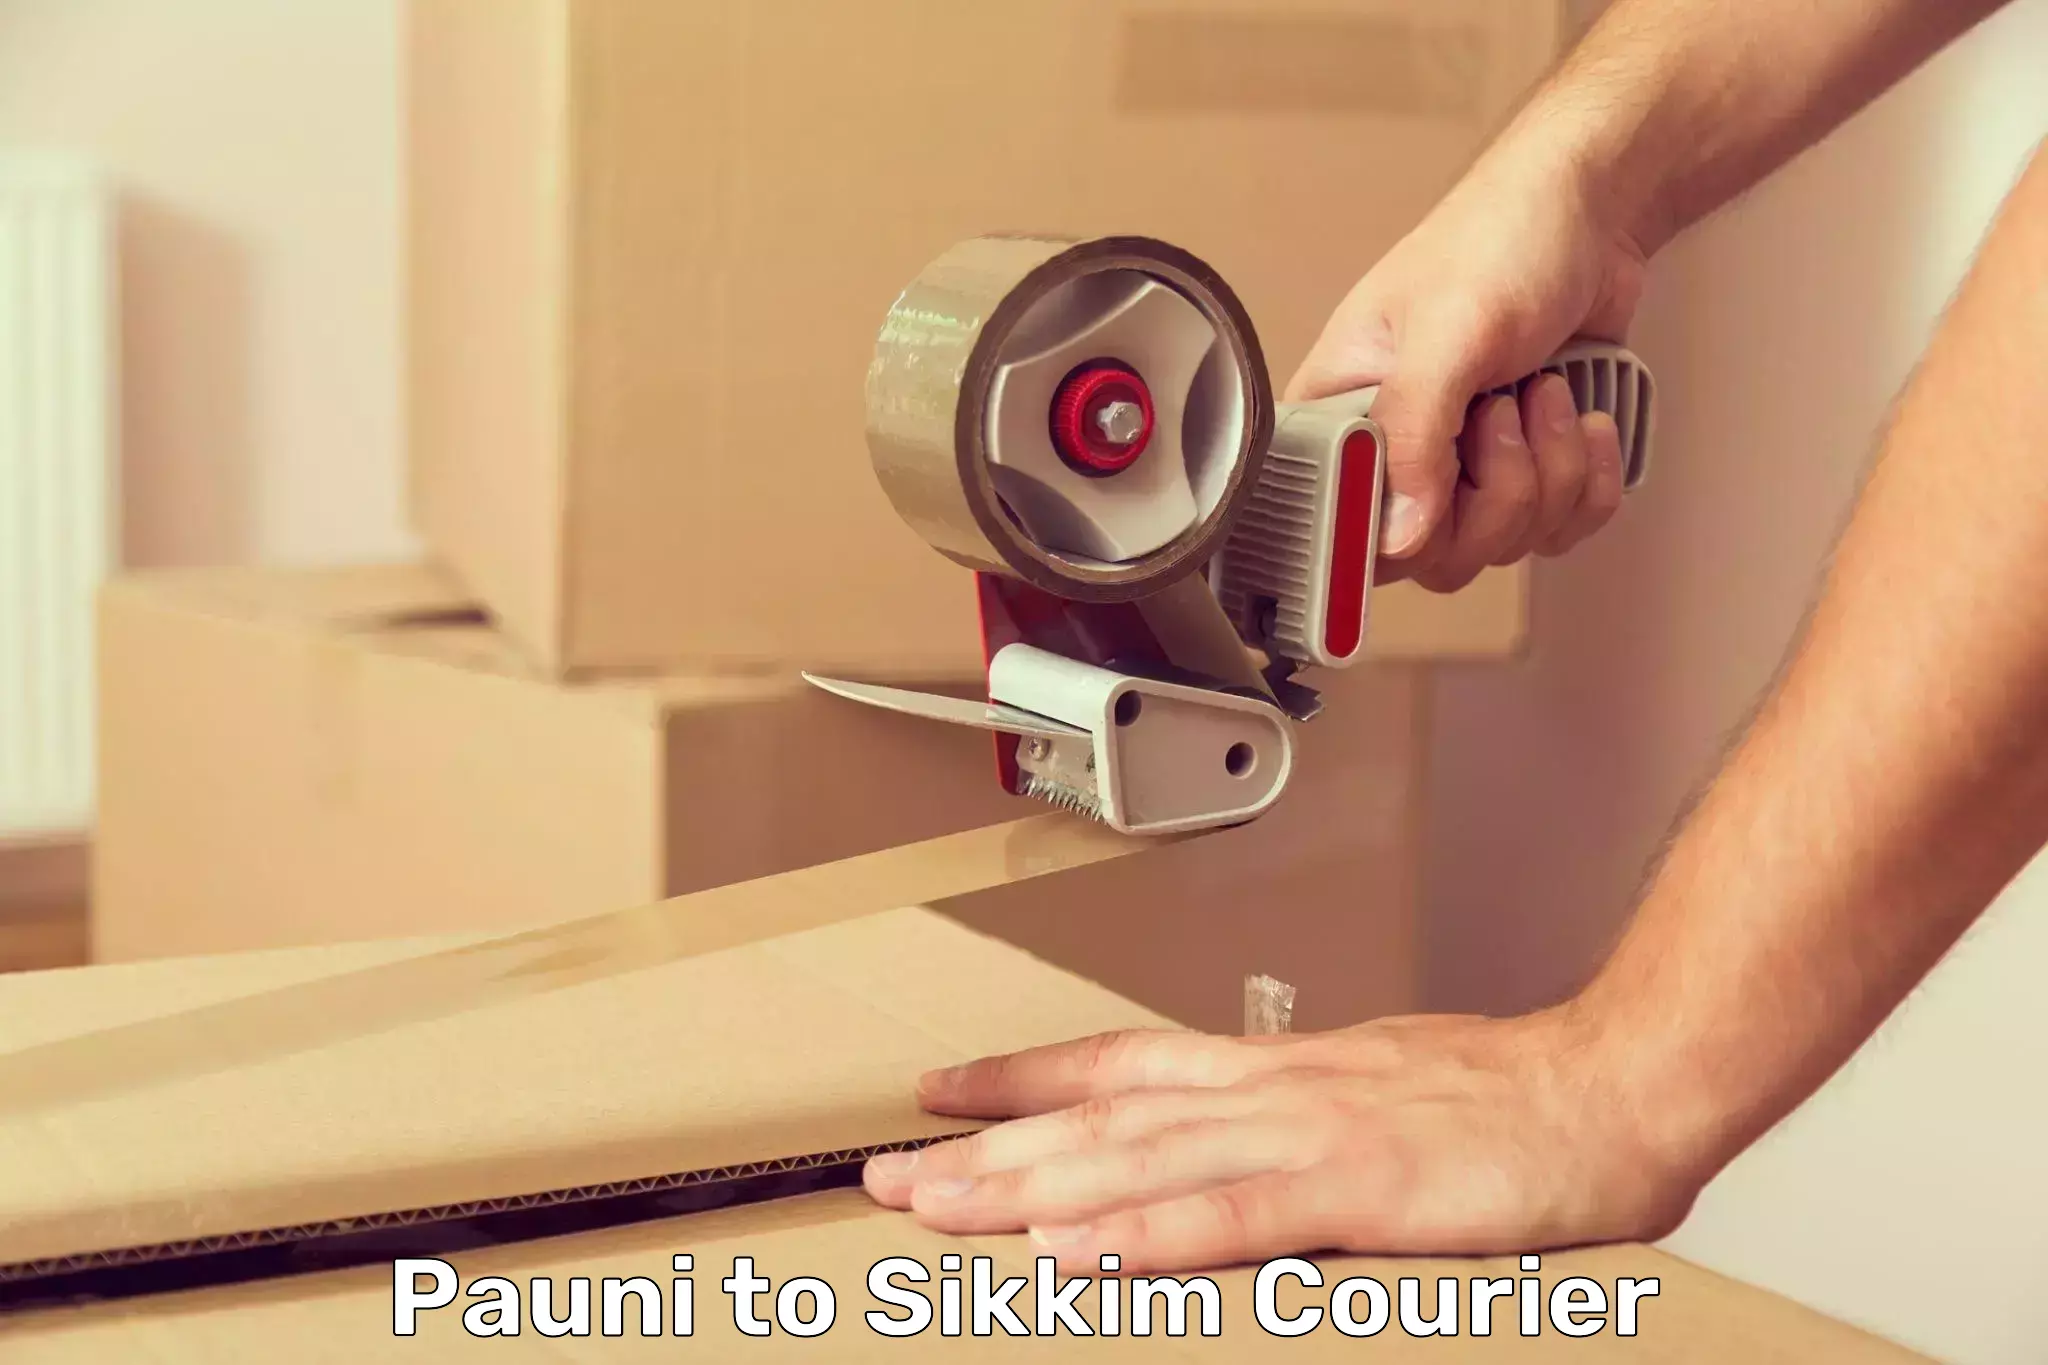 Fast shipping solutions Pauni to Pelling